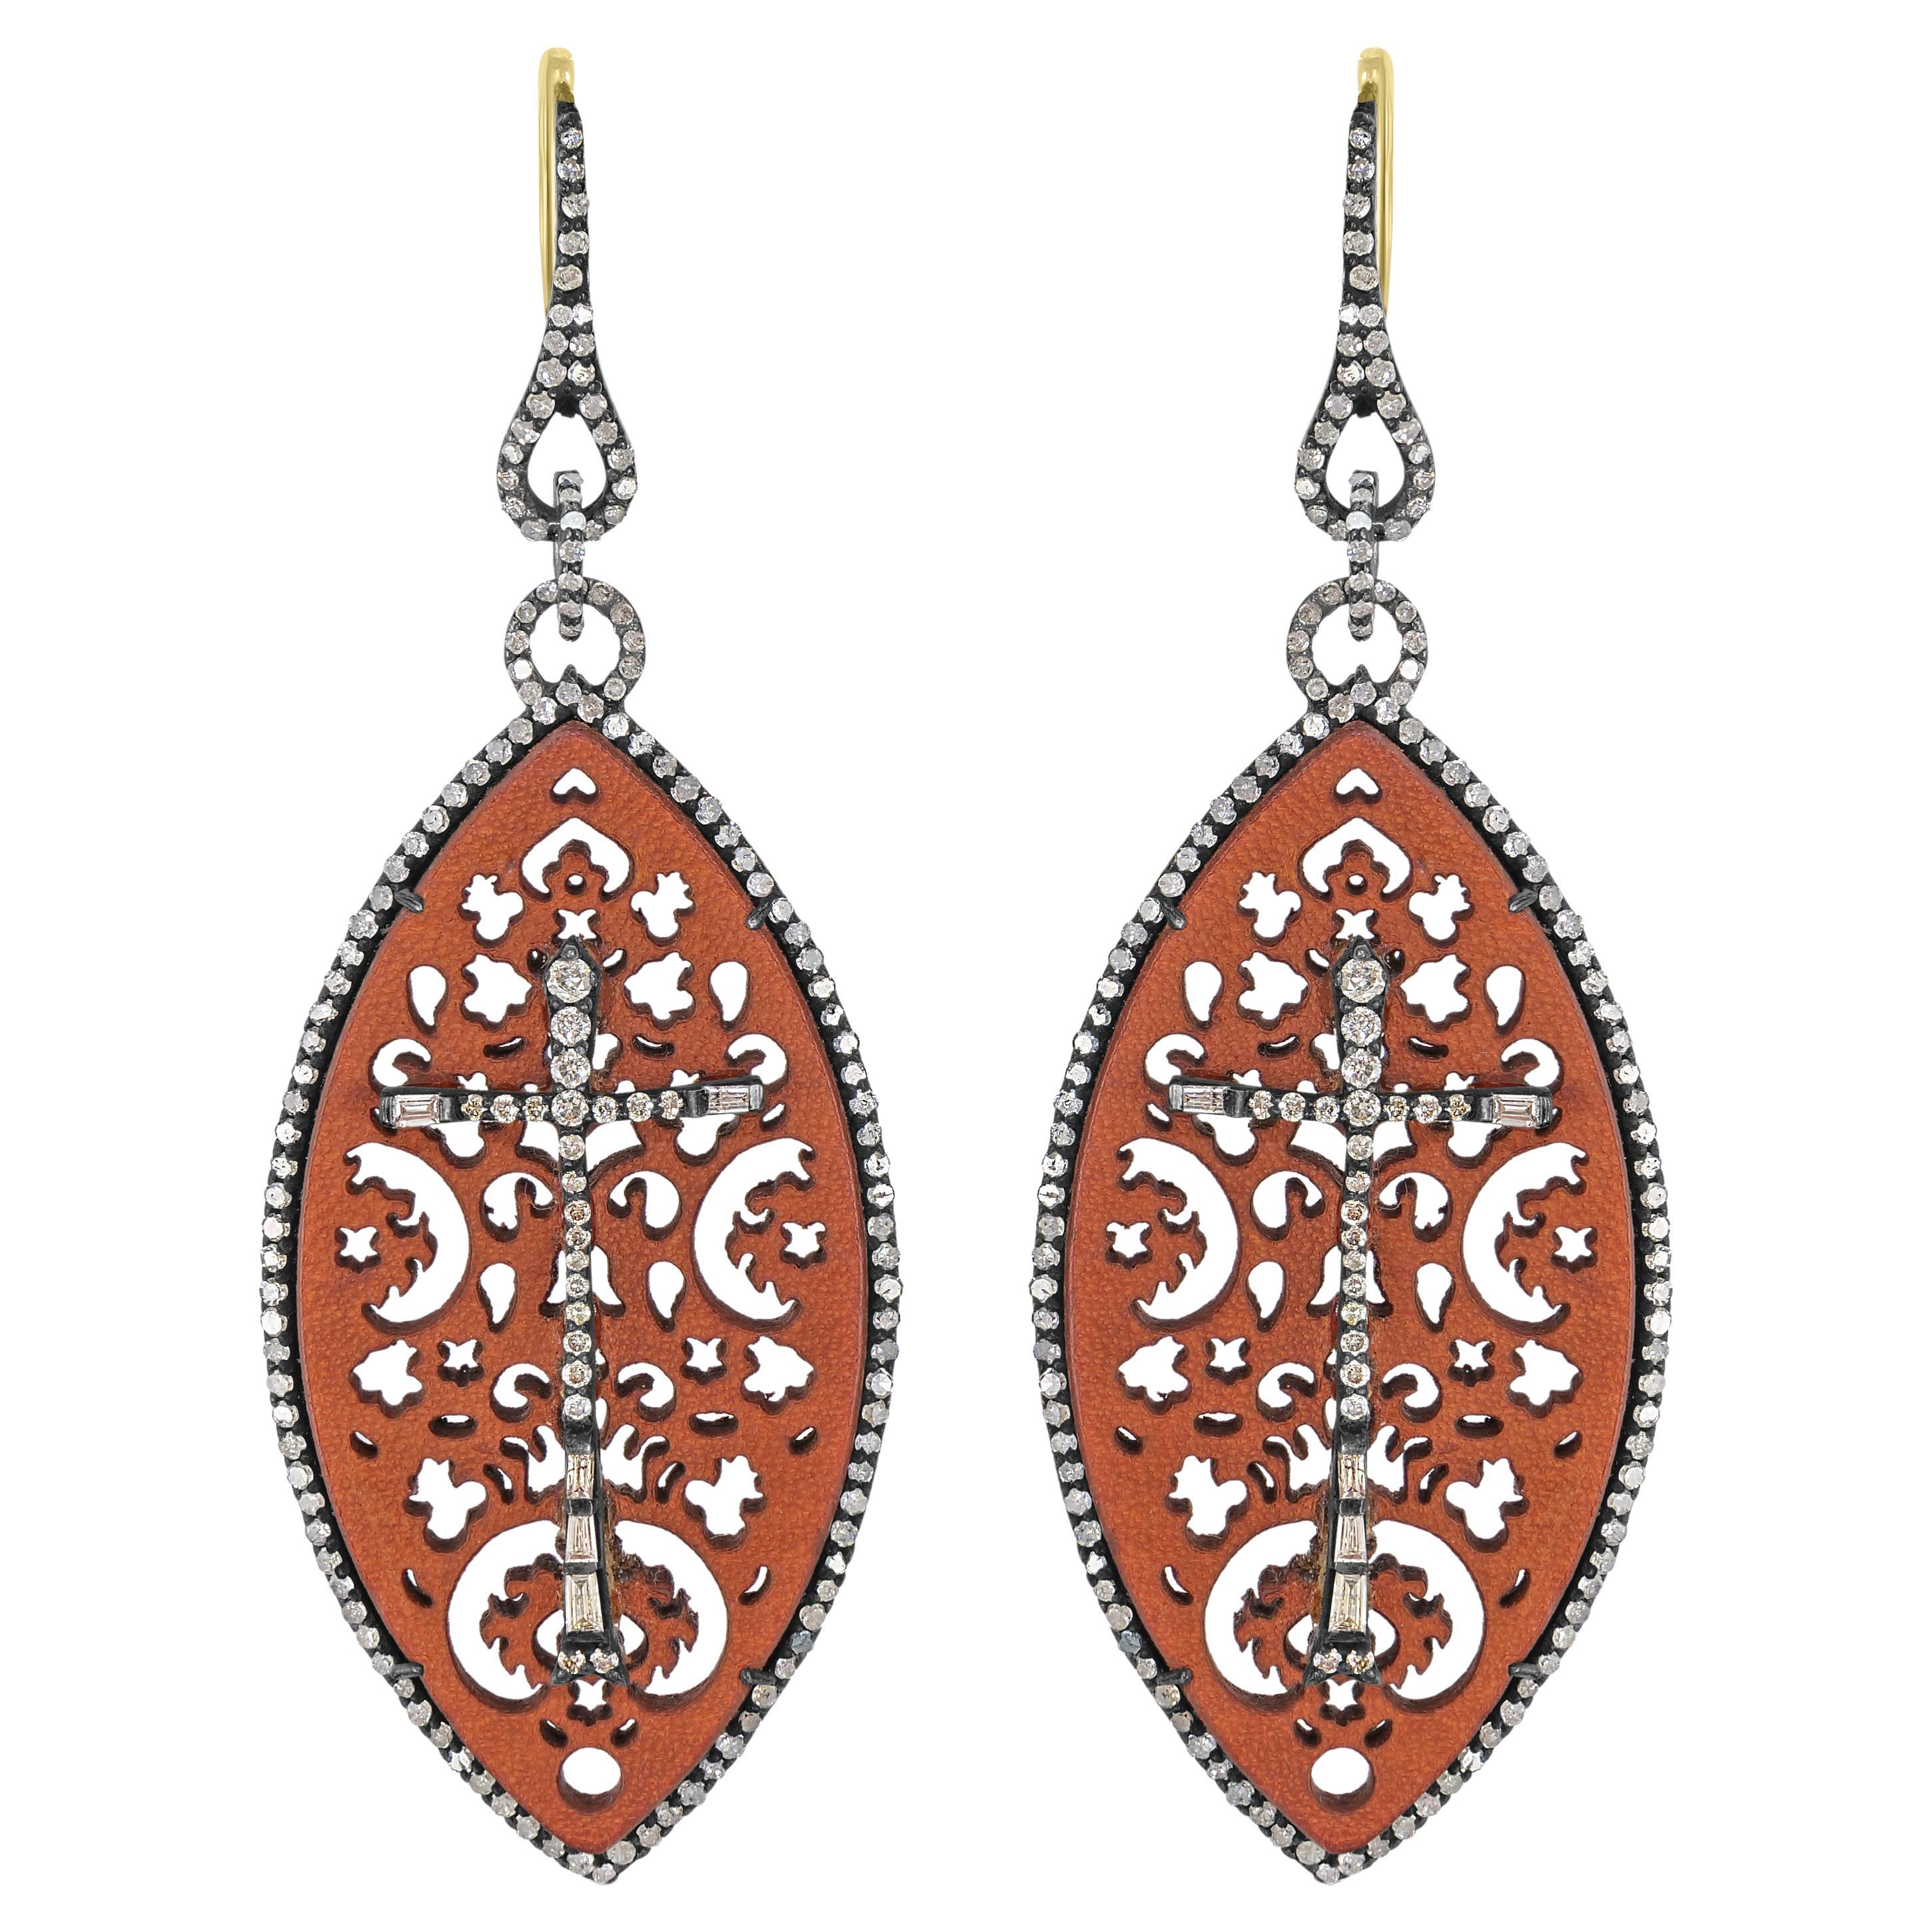 Victorian 3.19 Cttw. Filigree Drop Earrings in 18k Gold and Sterling Silver